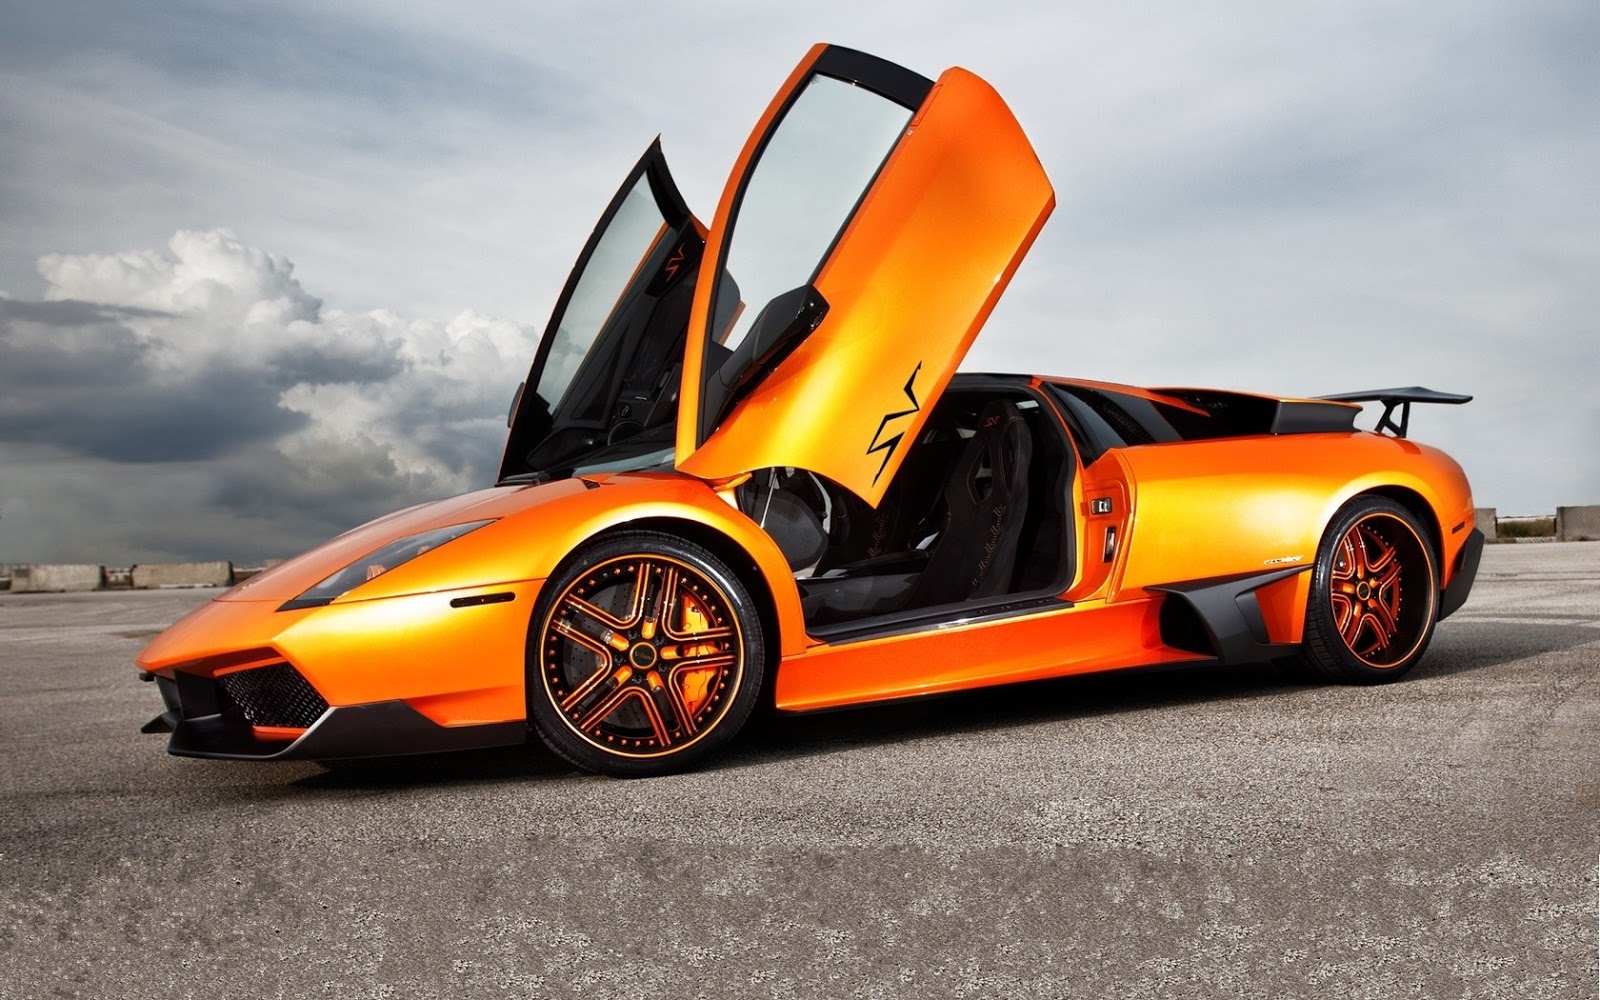 Cars-HD-Wallpapers: Lamborghini SuperVeloce best HD picture